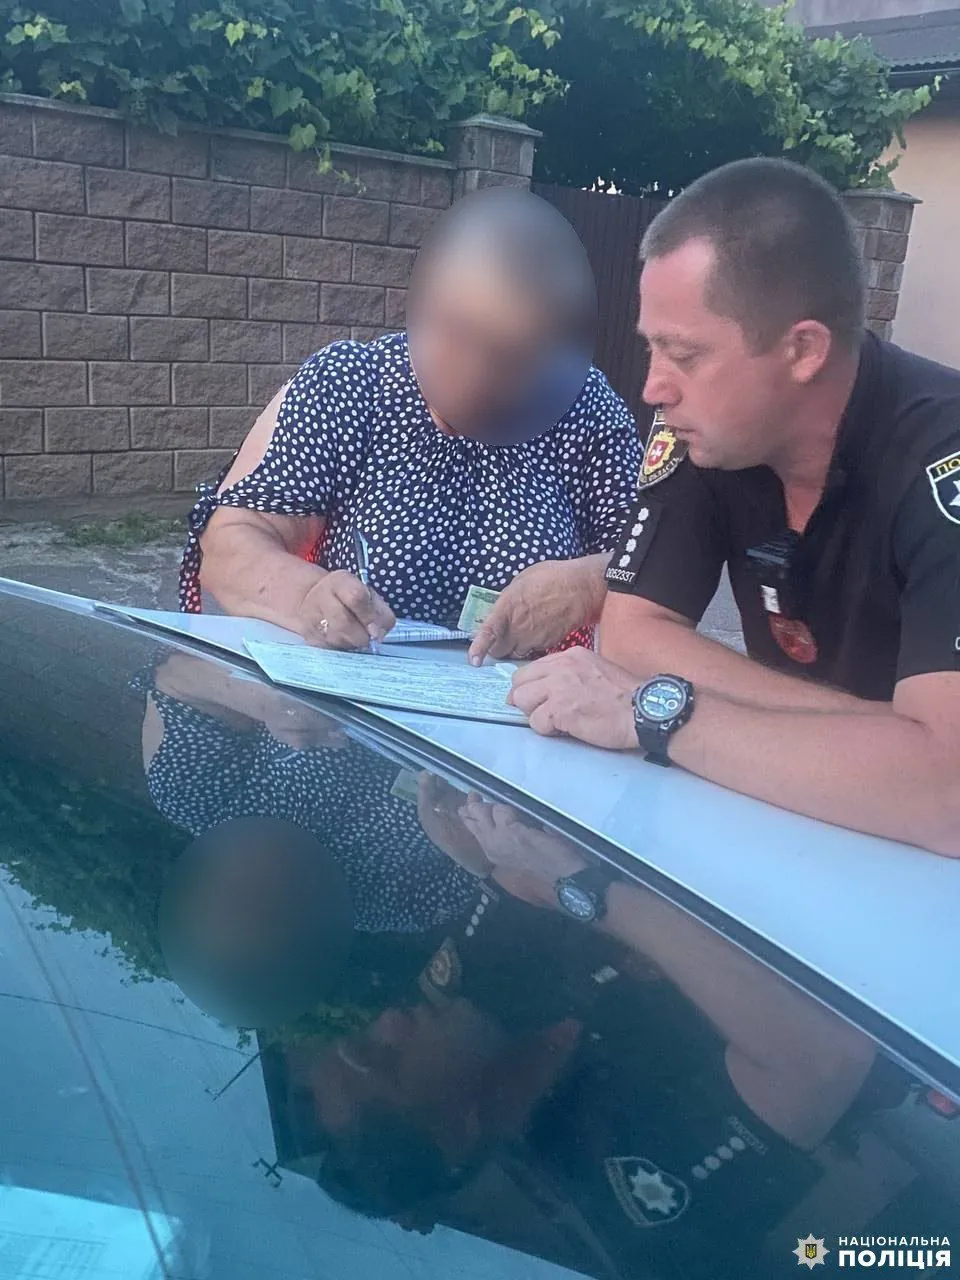 The tradition of celebrating christenings has been modernized: in Rivne region, a woman who carried passengers in the trunk was fined 510 hryvnias